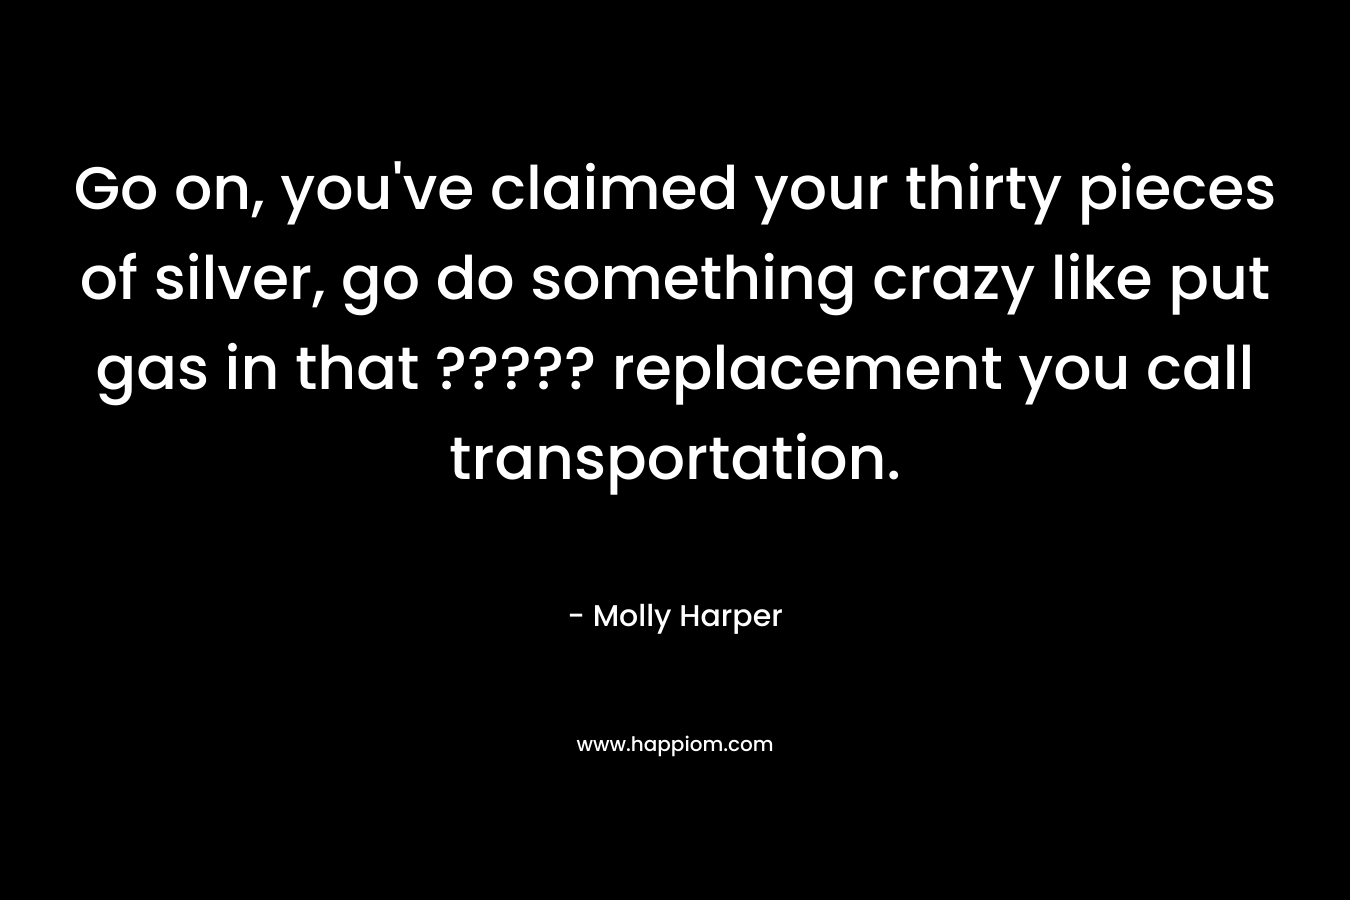 Go on, you’ve claimed your thirty pieces of silver, go do something crazy like put gas in that ????? replacement you call transportation. – Molly Harper